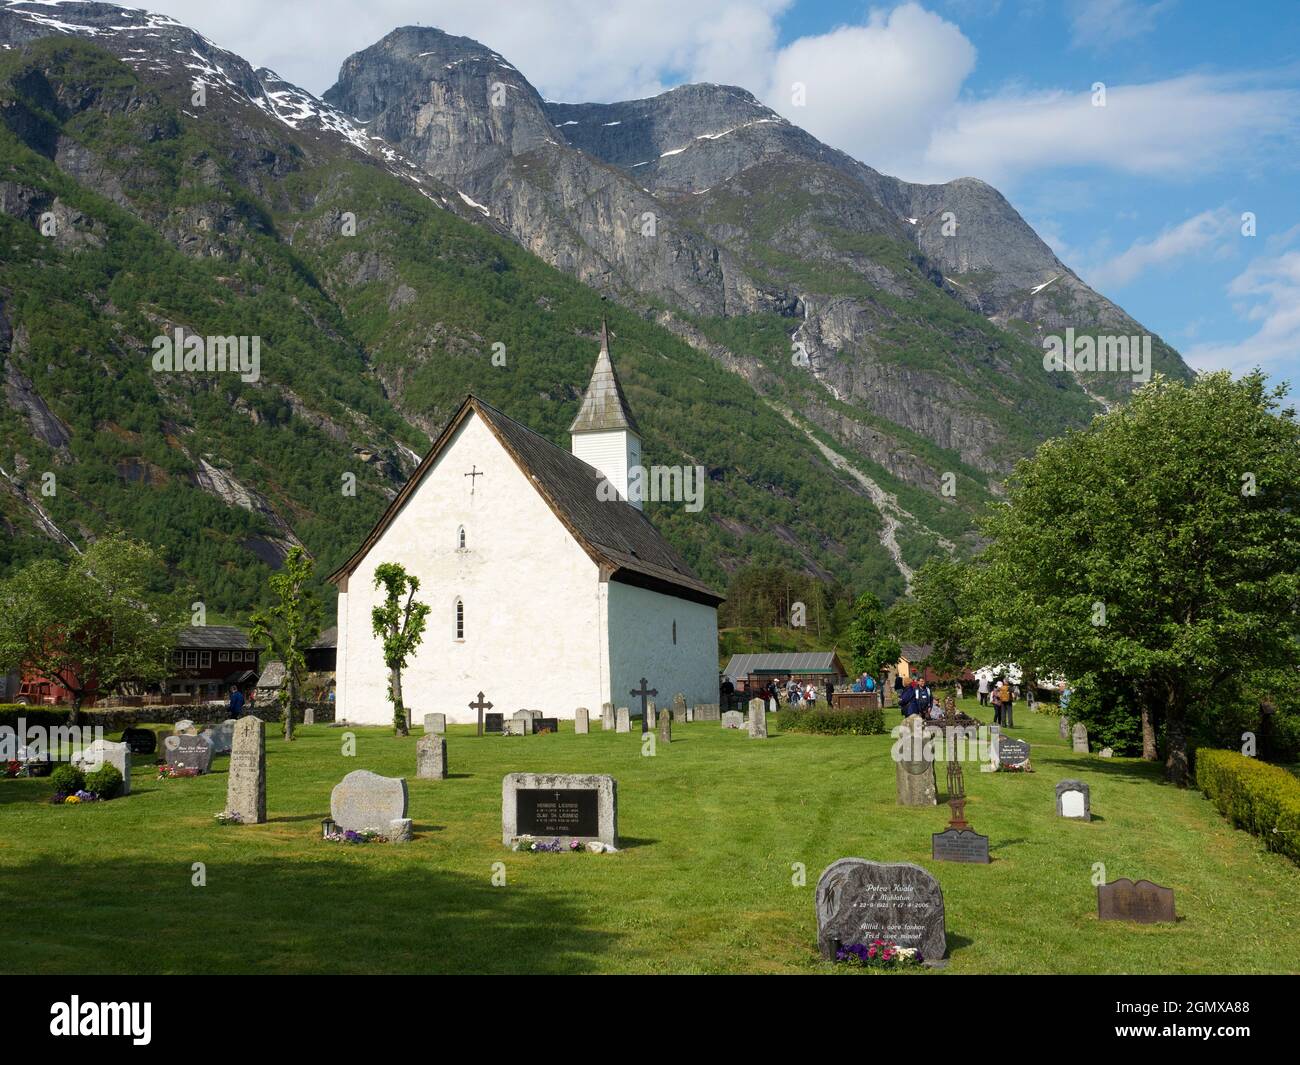 Eidfjord, Norway - 31 May 2016; no people in view. Eidfjord is a small town in Hardanger District, on the west coast of Norway. It is situated at the Stock Photo